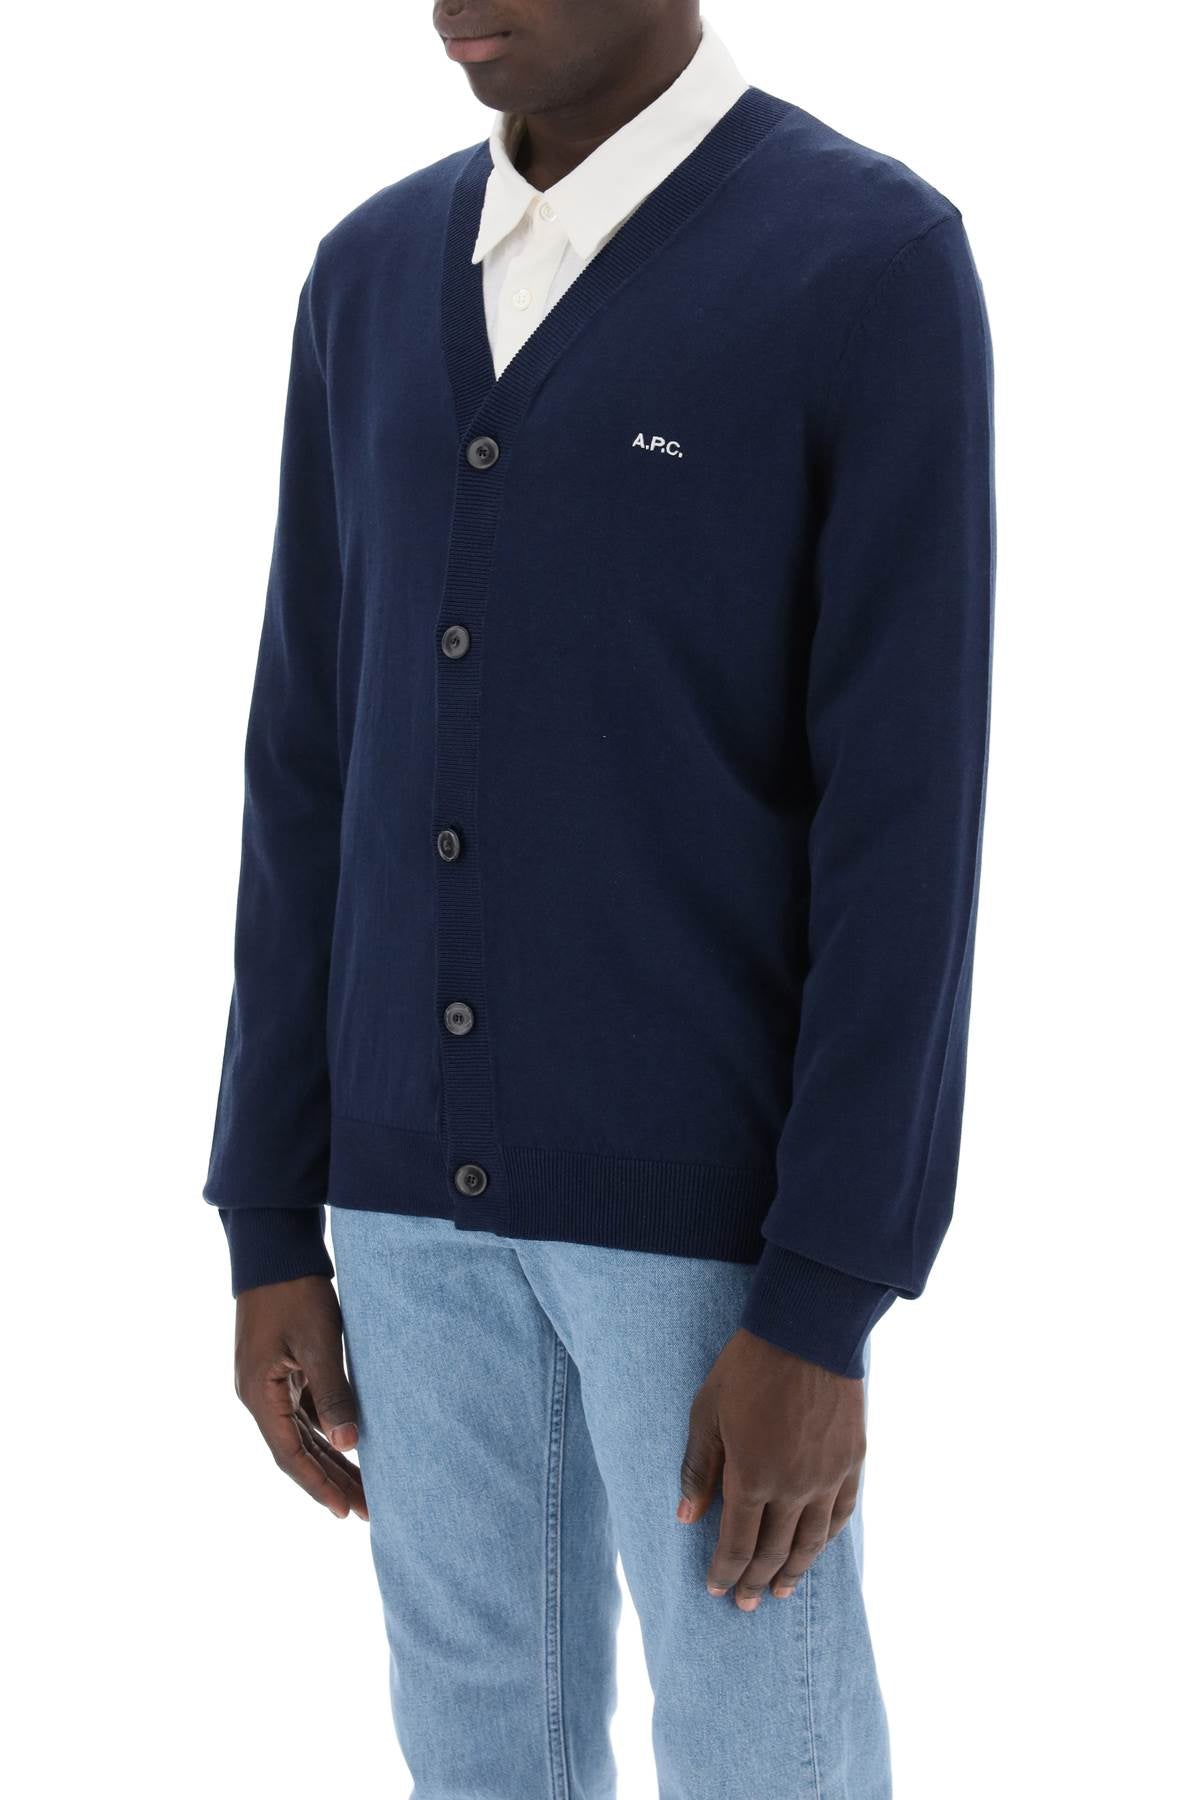 A.P.C. A.p.c. cotton curtis cardigan for a comfortable